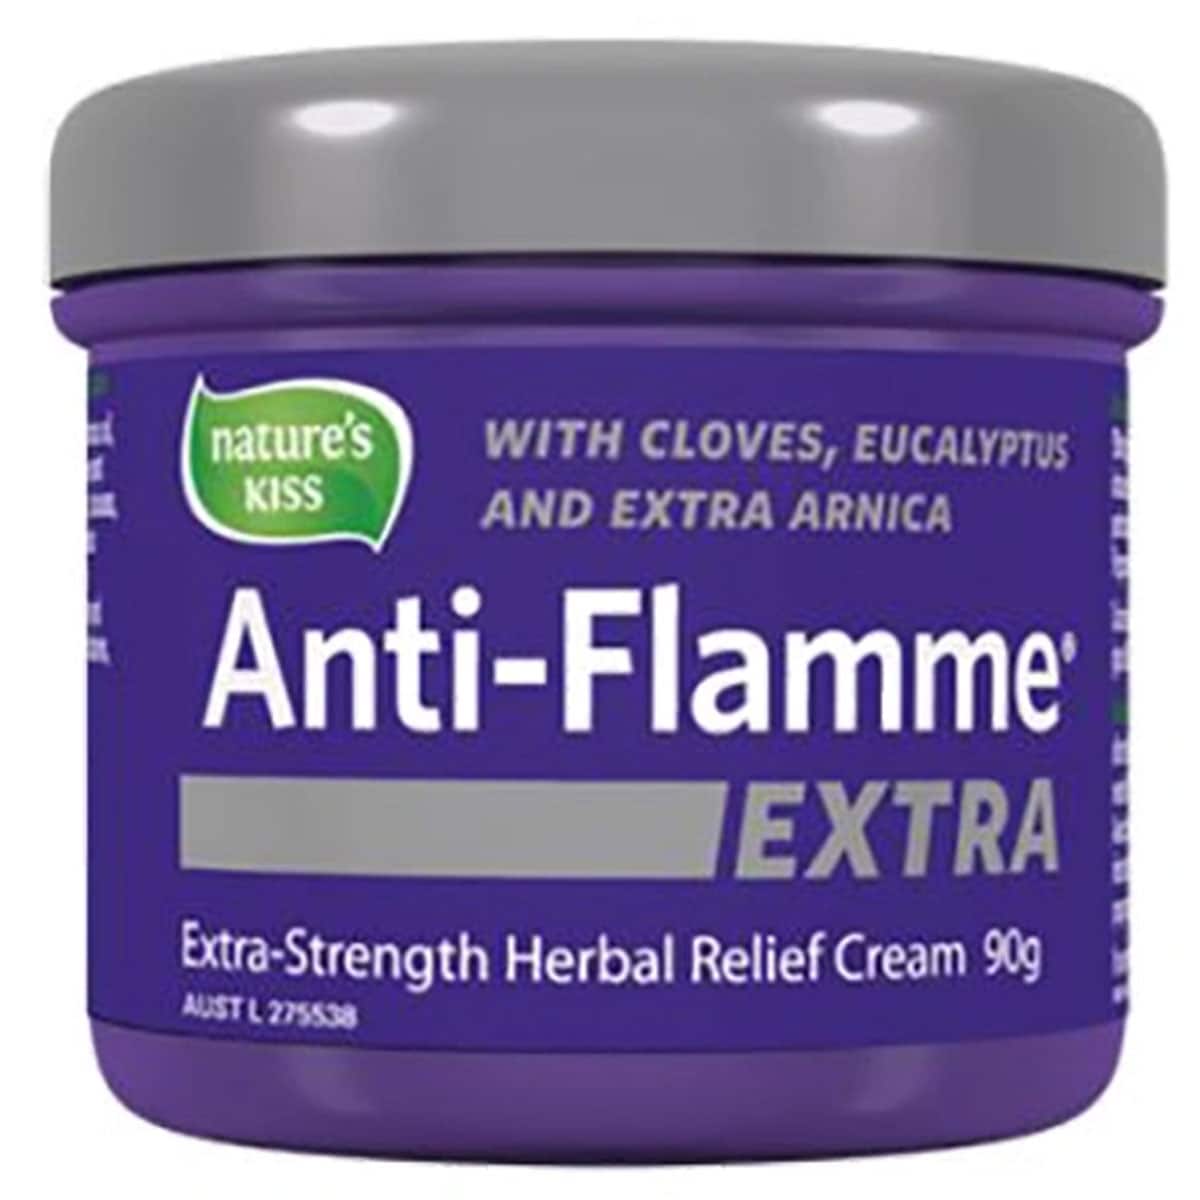 Anti-Flamme Extra Strength Herbal Relief Cream 90g